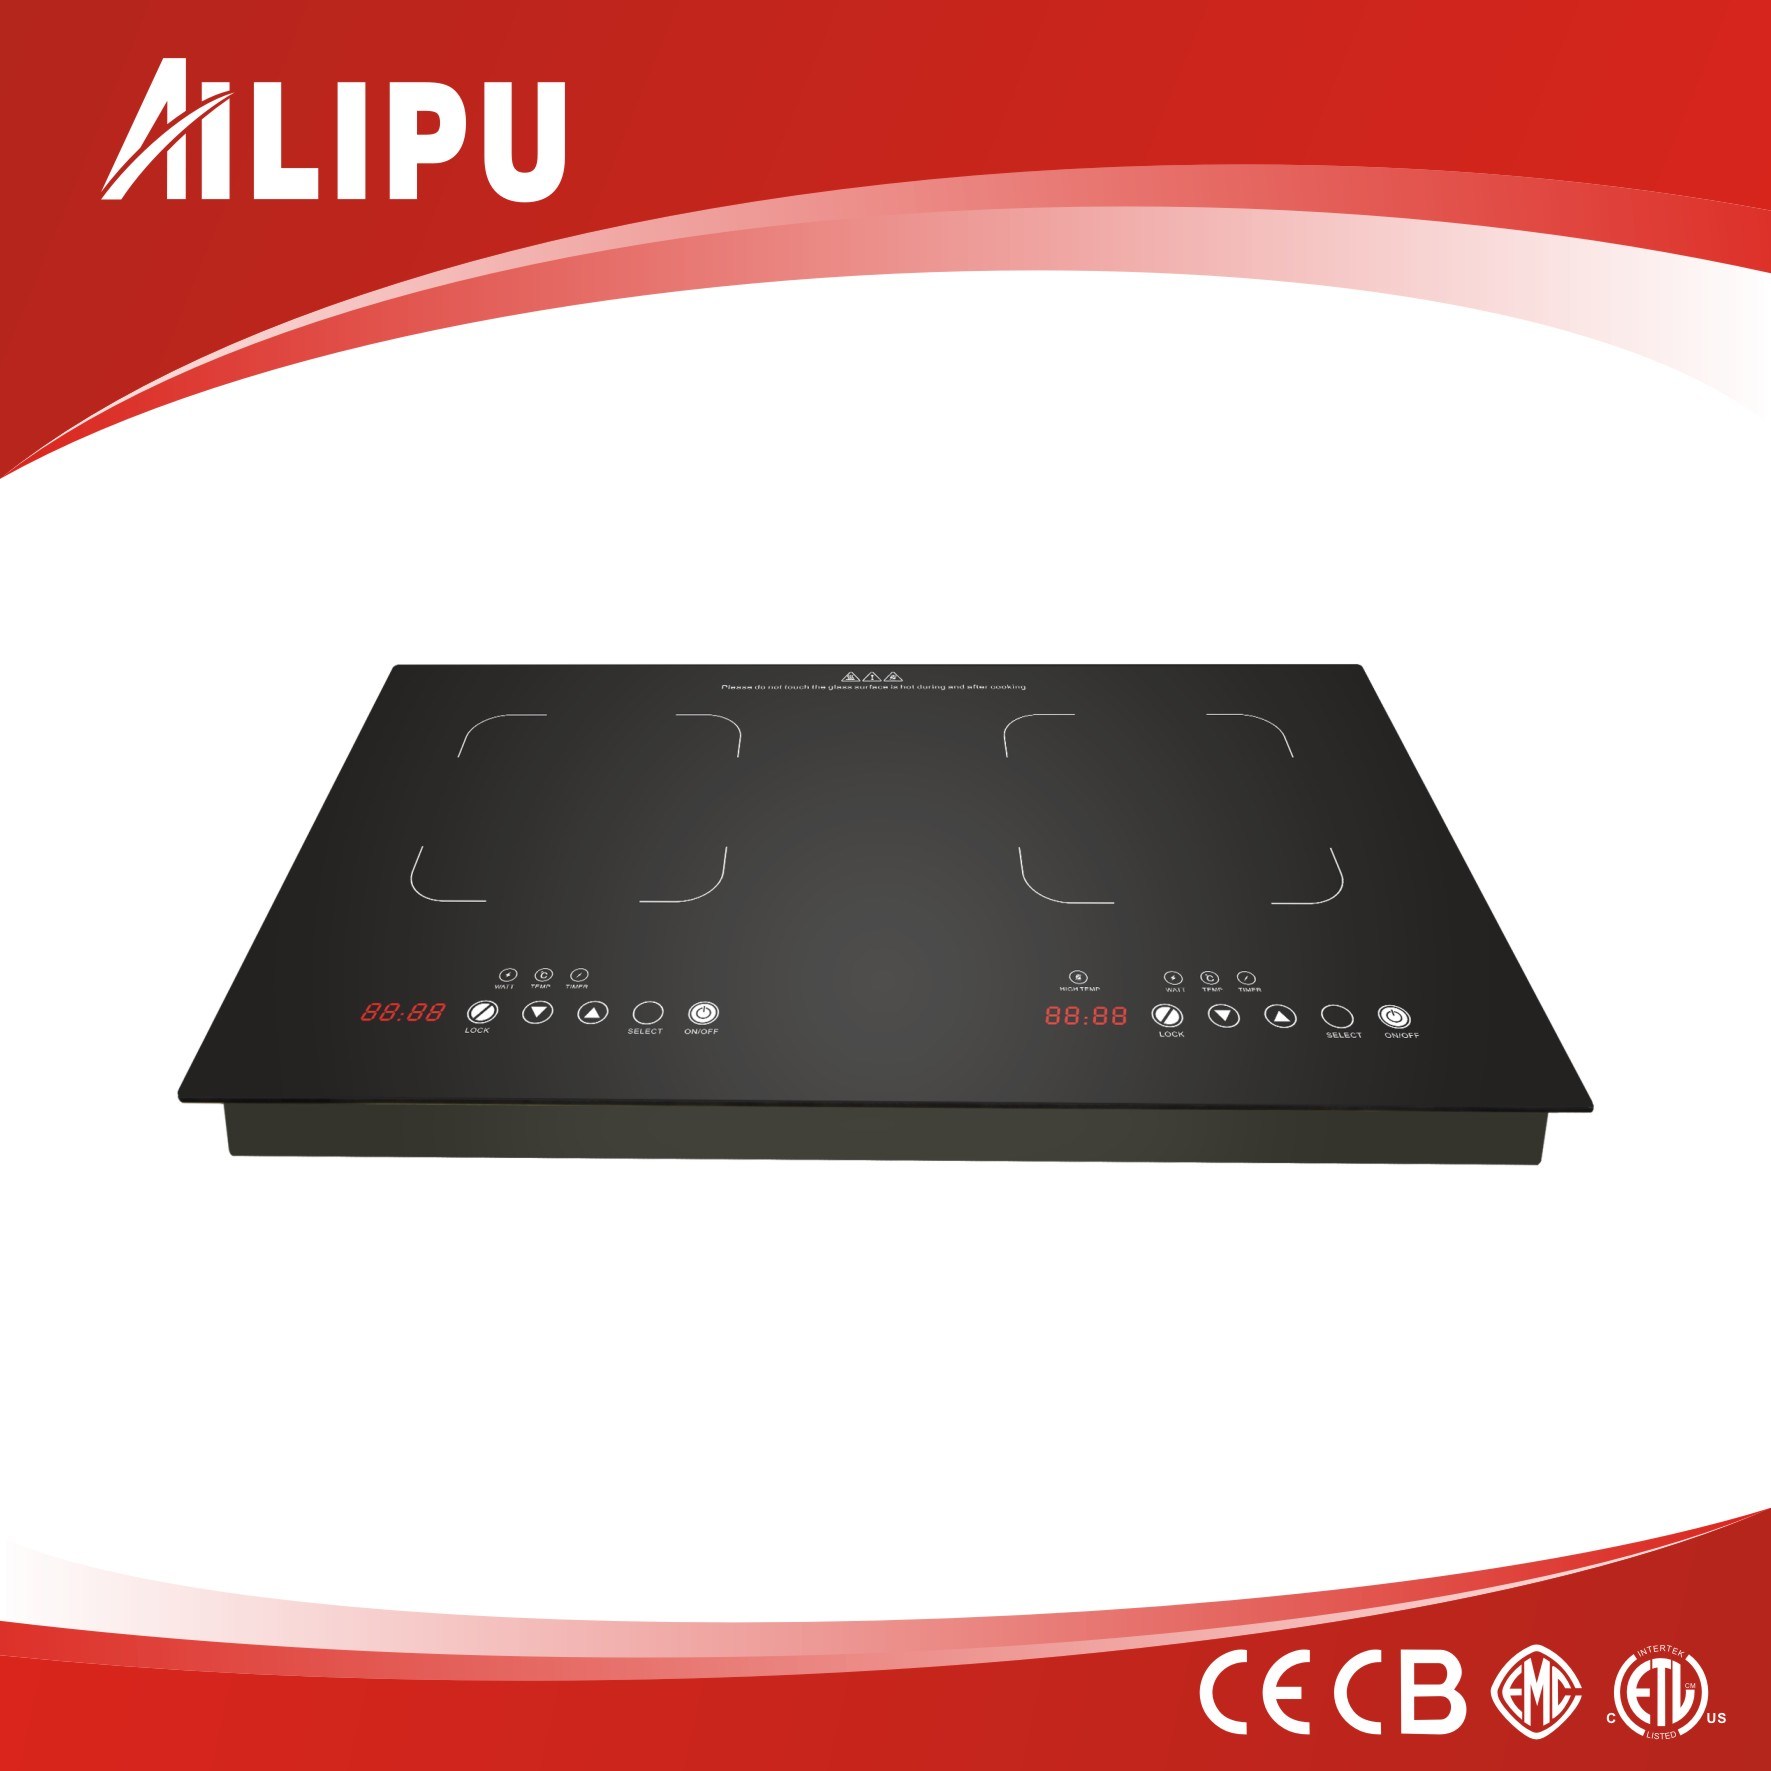 CB, Ce Approved Double Burns Induction Cooker Sm-Dic13b